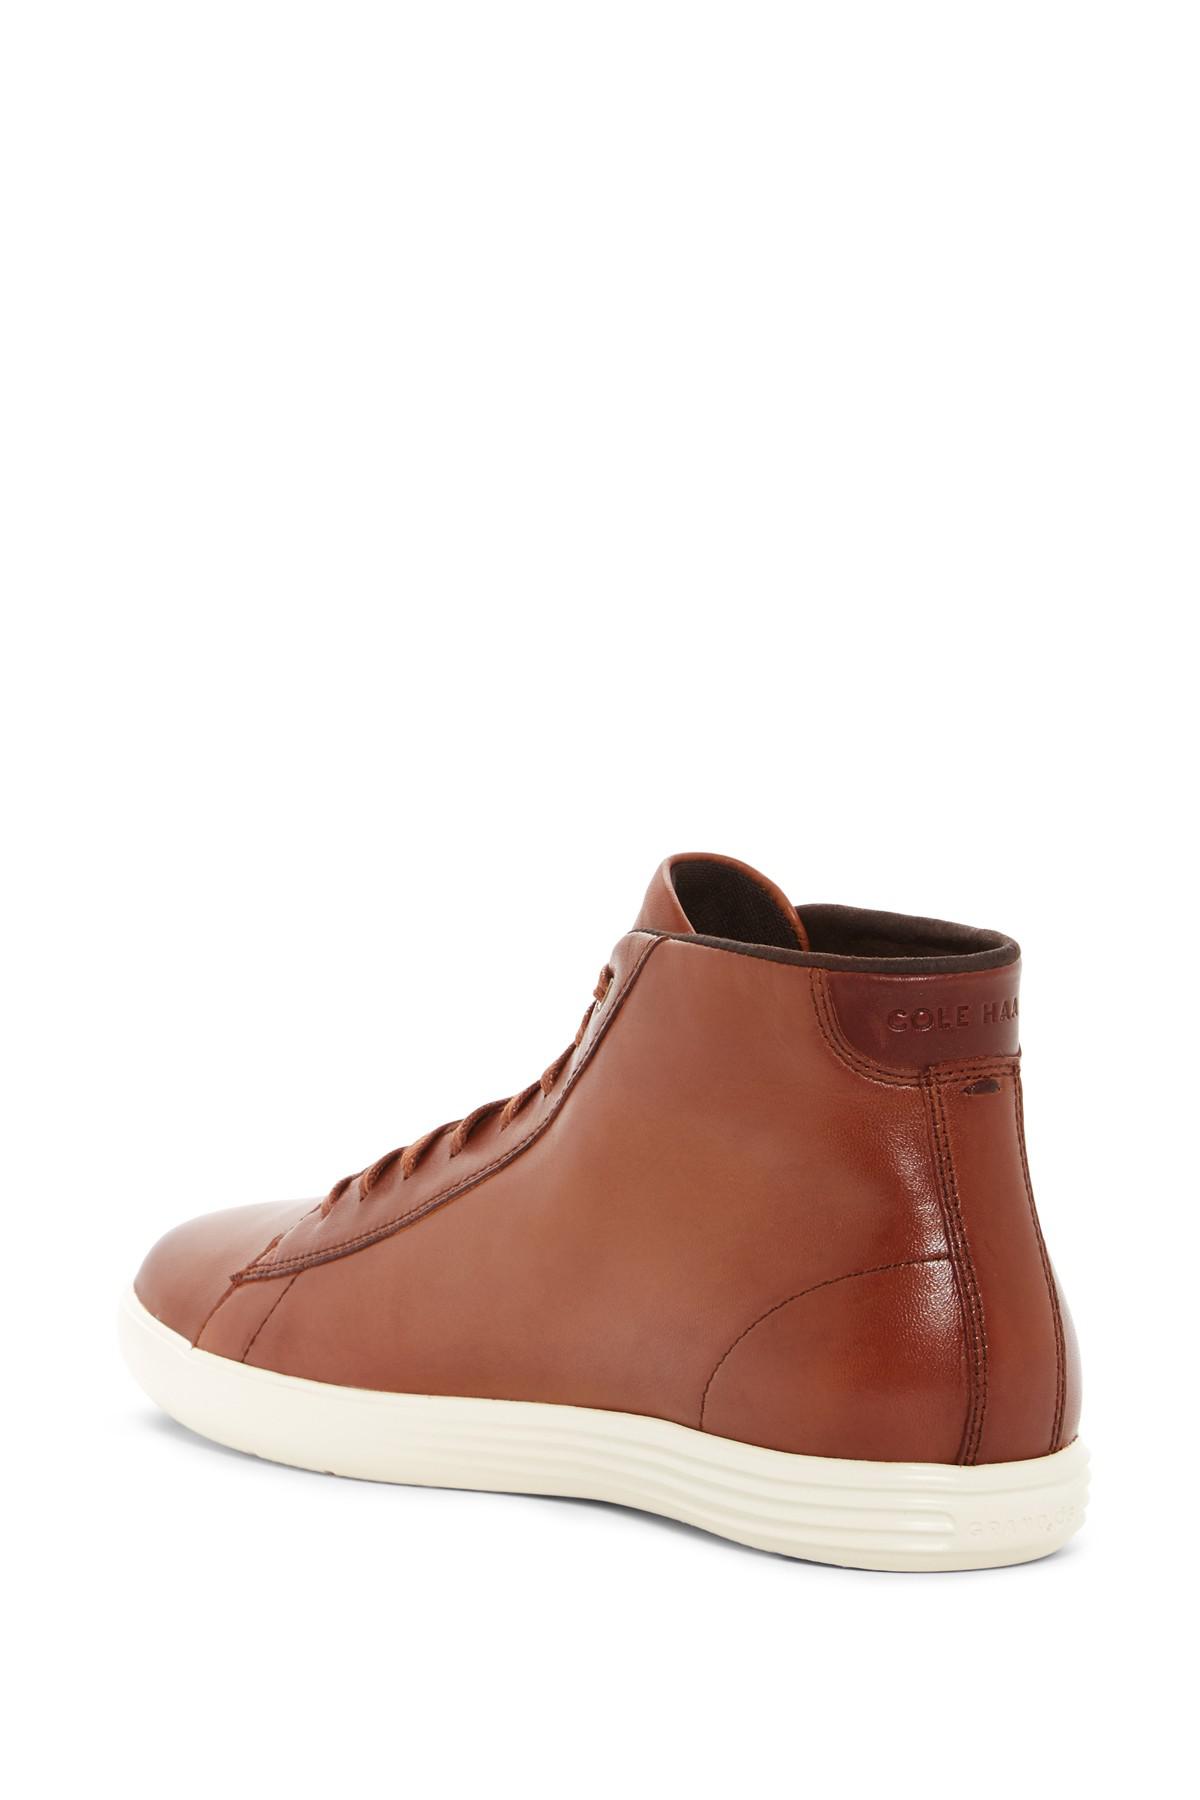 Cole Haan Leather Grand Crosscourt High 